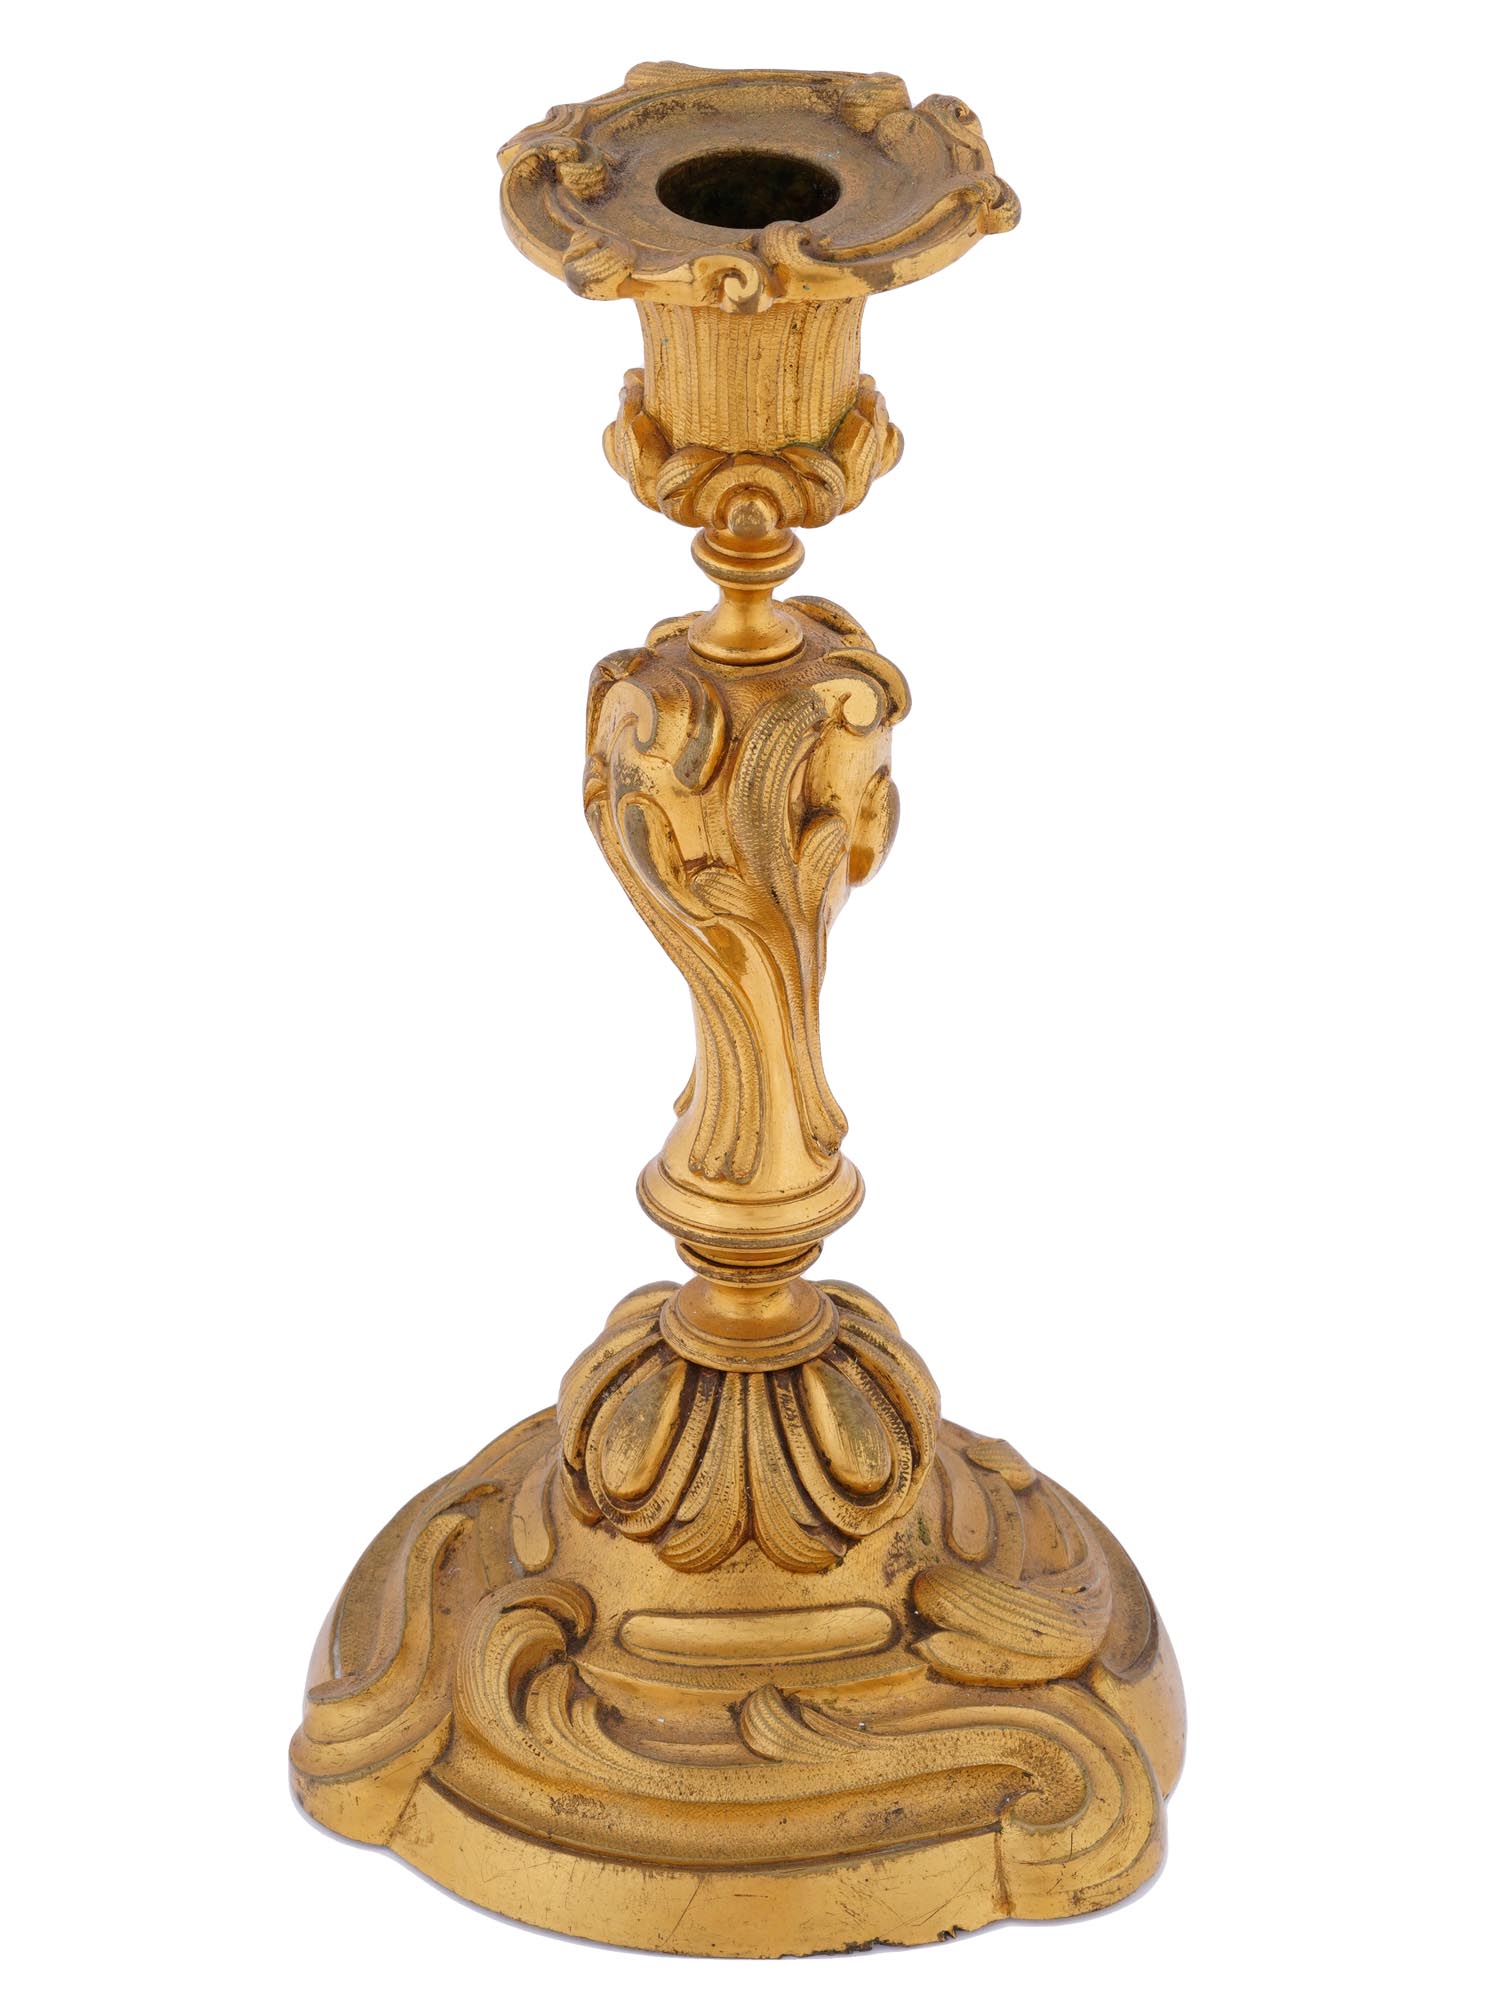 ANTIQUE FRENCH ROCOCO GILT BRONZE CANDLESTICK PIC-0